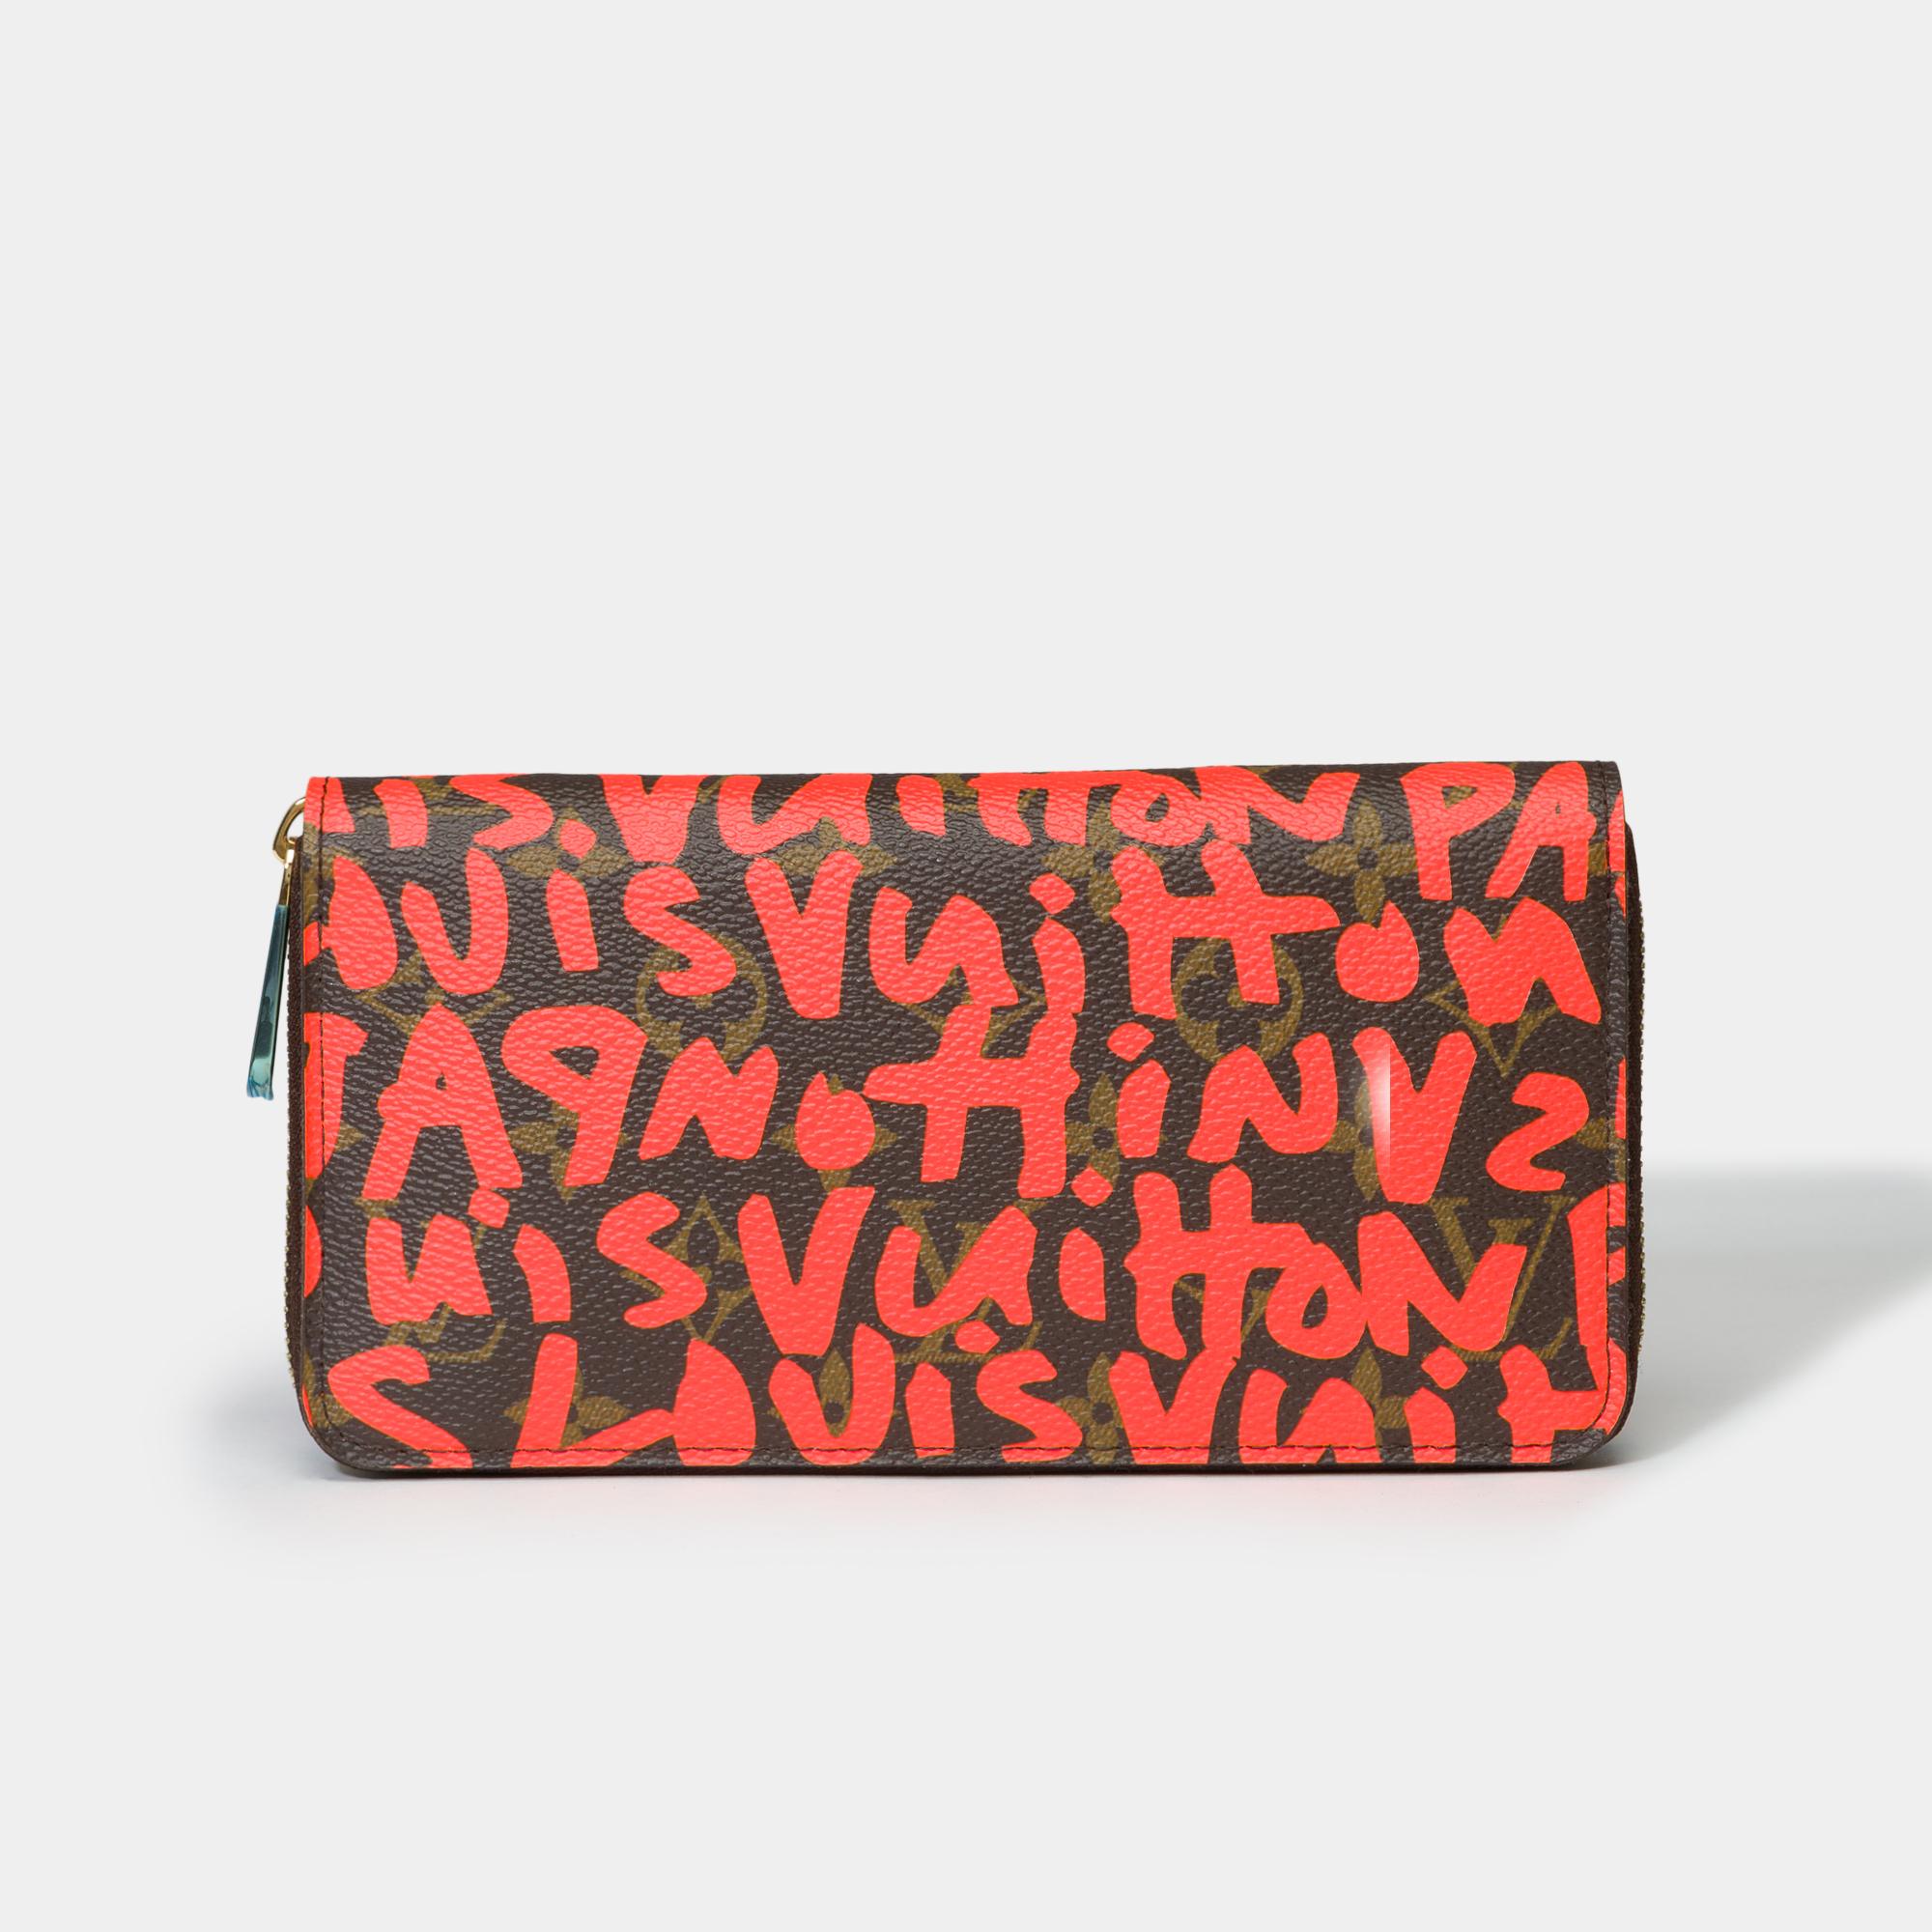 Amazing​ ​Collector’s​ ​Wallet​ ​and​ ​highly​ ​sought​ ​after​ ​Louis​ ​Vuitton​ ​Zippy​ ​Graffiti​ ​limited​ ​edition​ ​from​ ​by​ ​Stephen​ ​Sprouse​ ​in​ ​monogram​ ​canvas​ ​coated​ ​with​ ​orange​ ​graffiti​ ​patterns,​ ​gold​ ​metal​ ​trim​